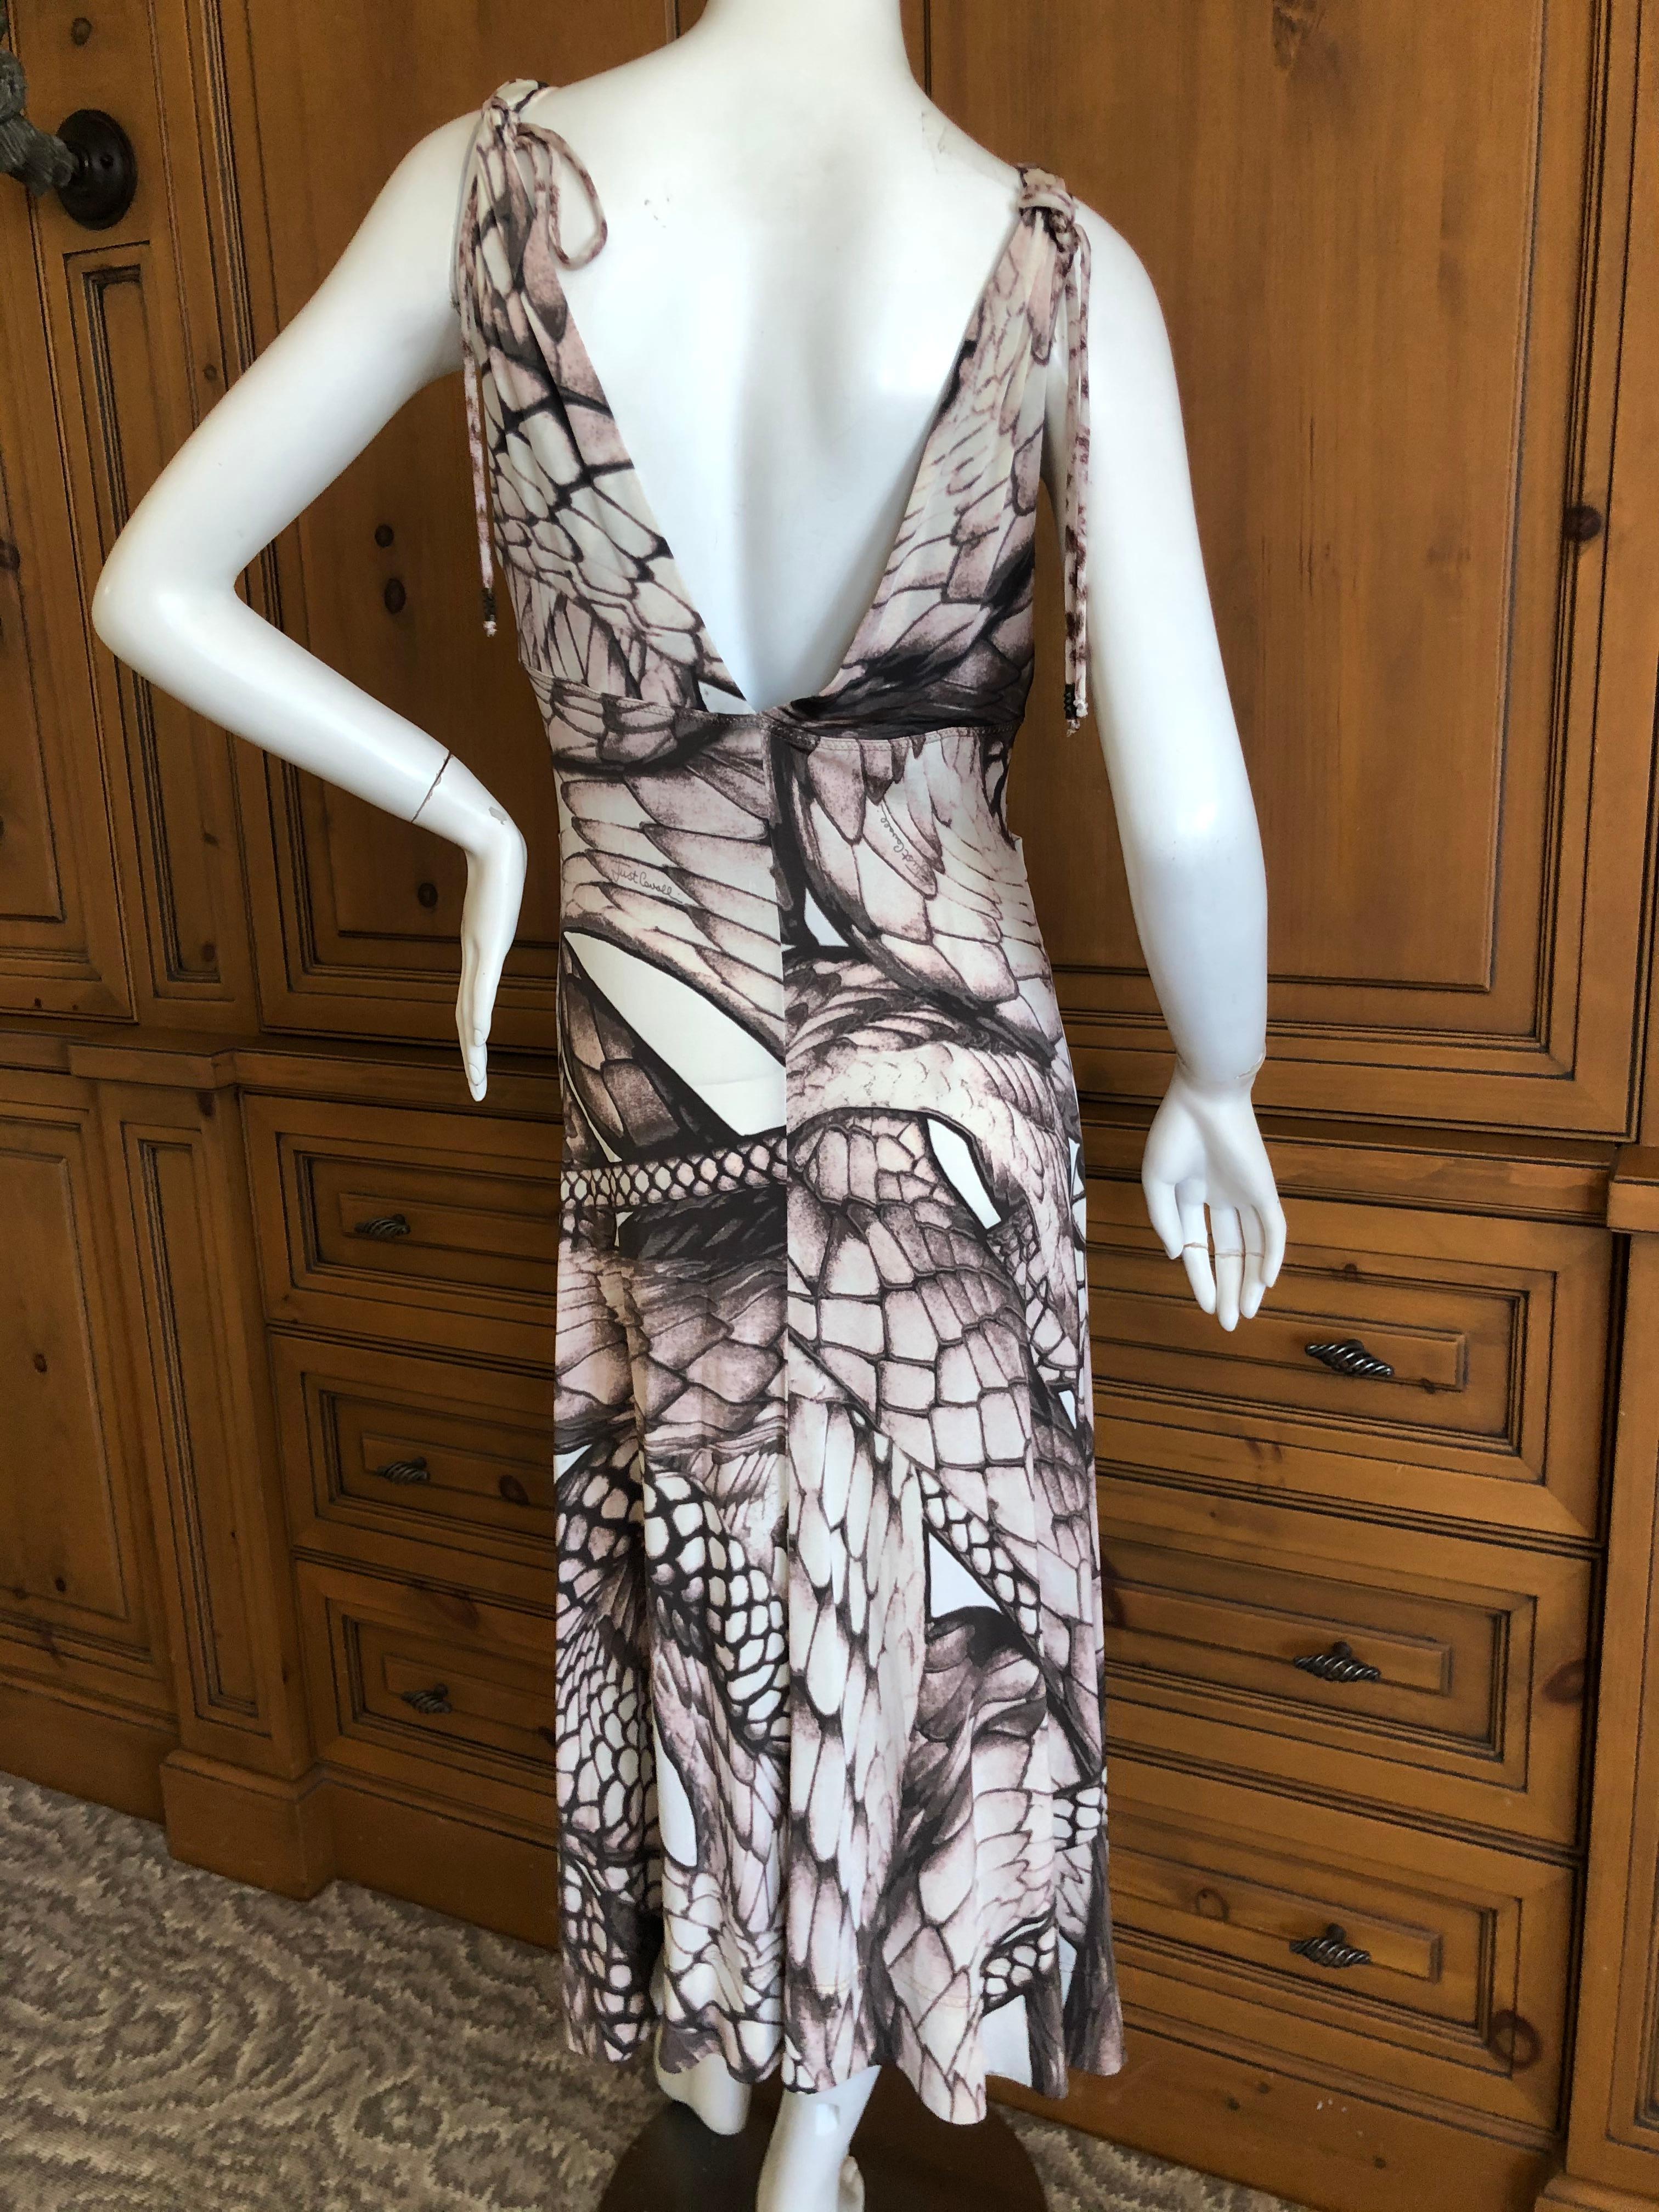 Roberto Cavalli for Just Cavalli Snake Print Dress with Brass Rings Sz 46 In Excellent Condition For Sale In Cloverdale, CA